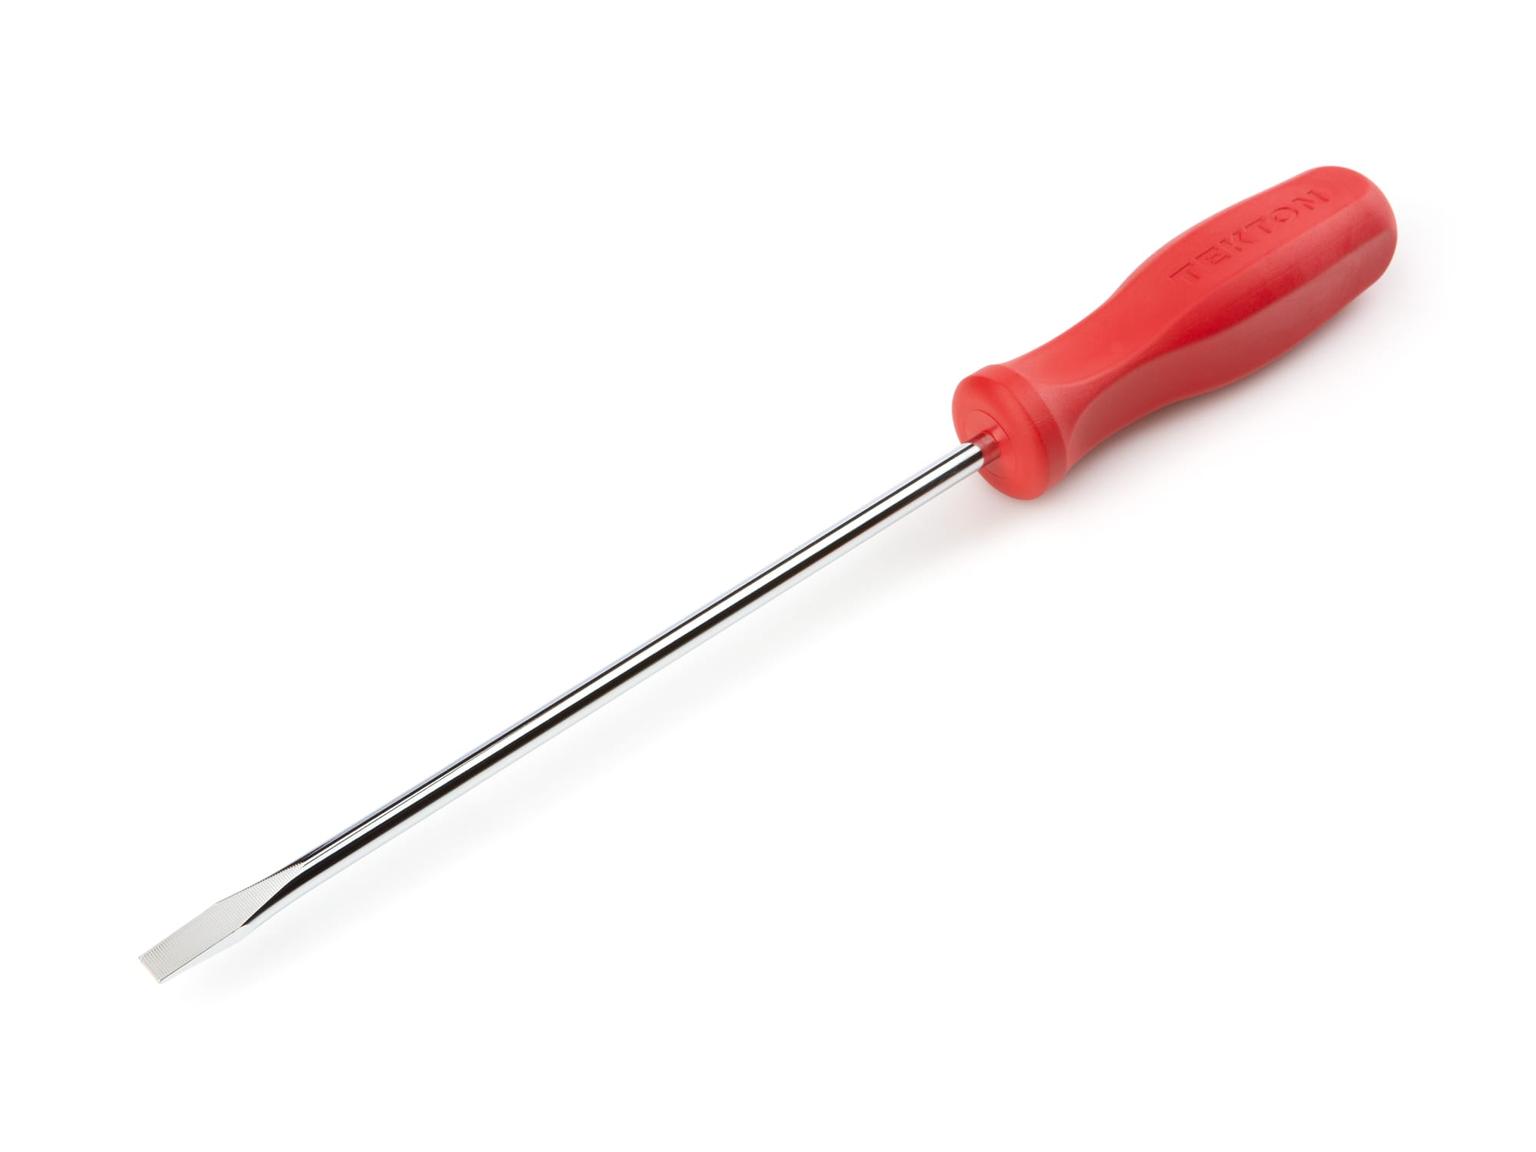 TEKTON DSS34250-T Long 1/4 Inch Slotted Hard Handle Screwdriver